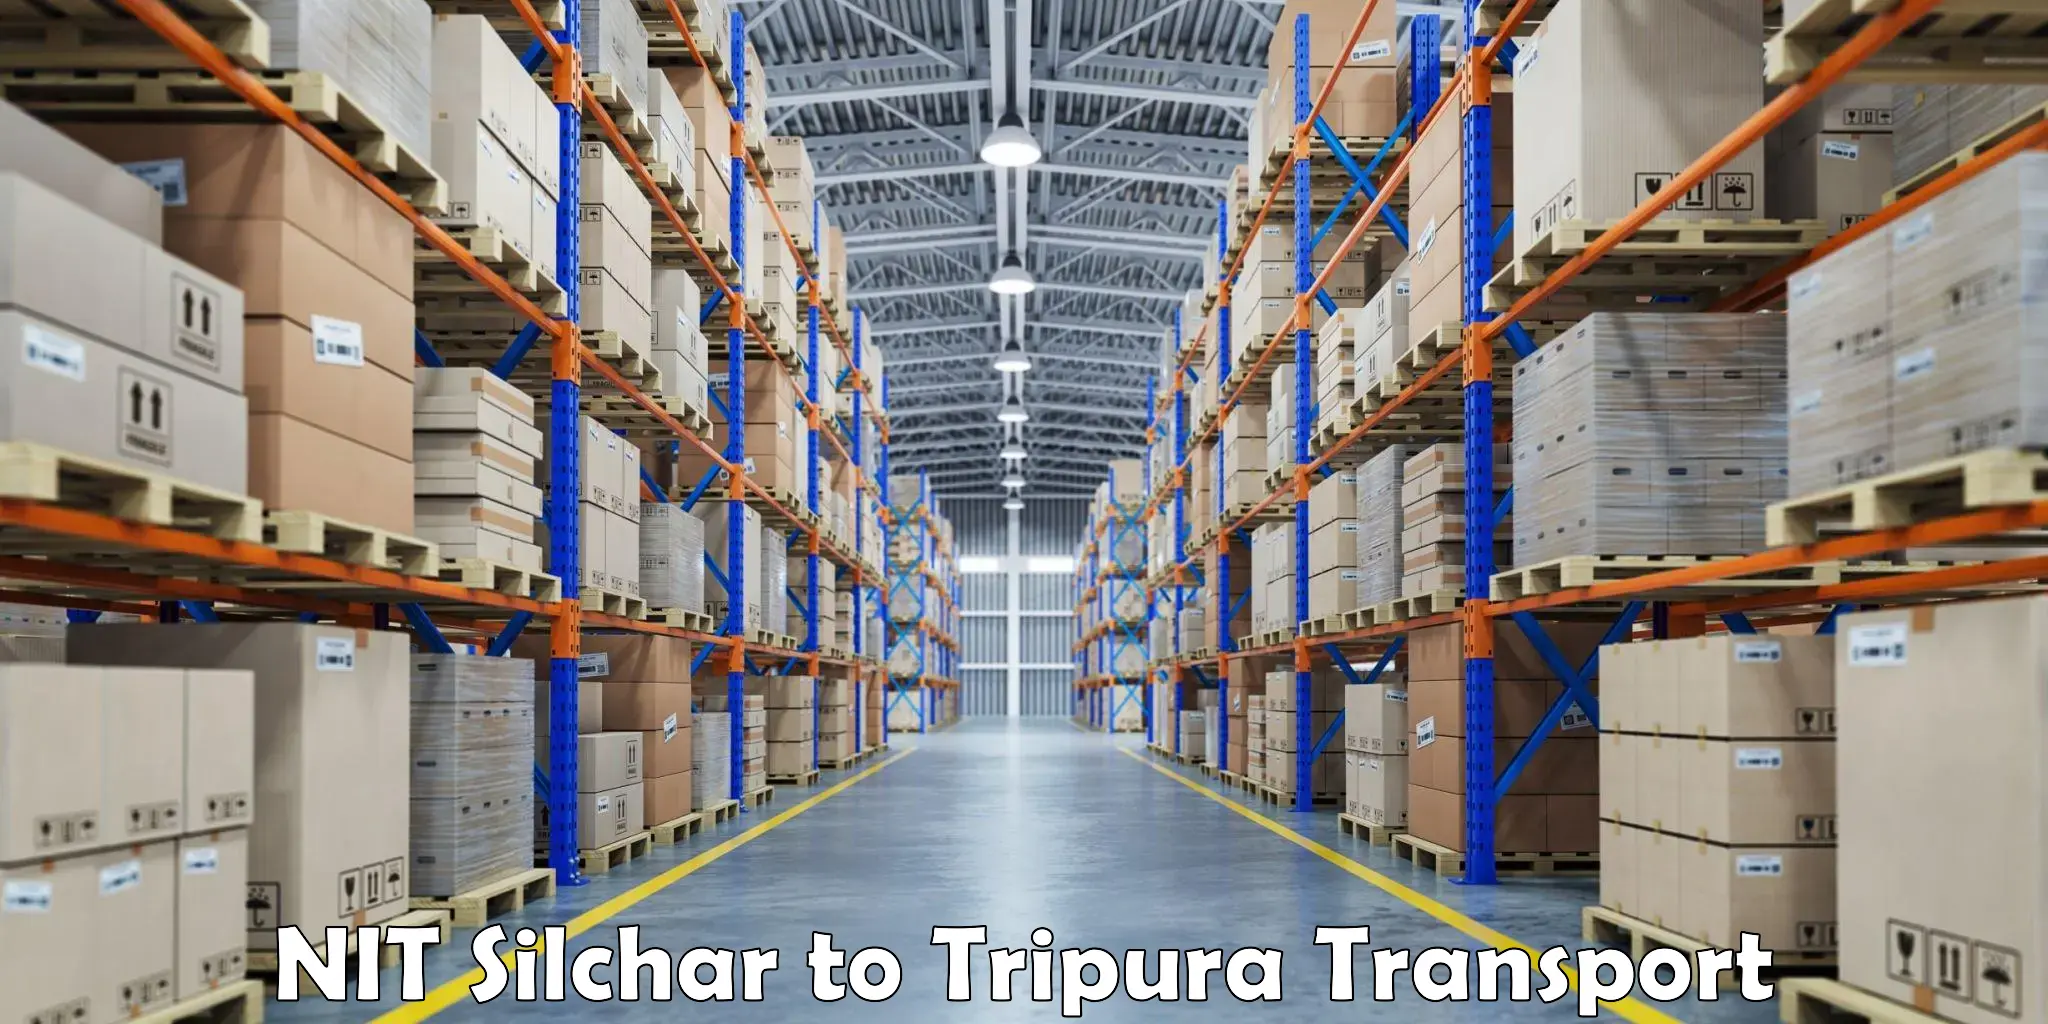 Vehicle transport services NIT Silchar to Tripura